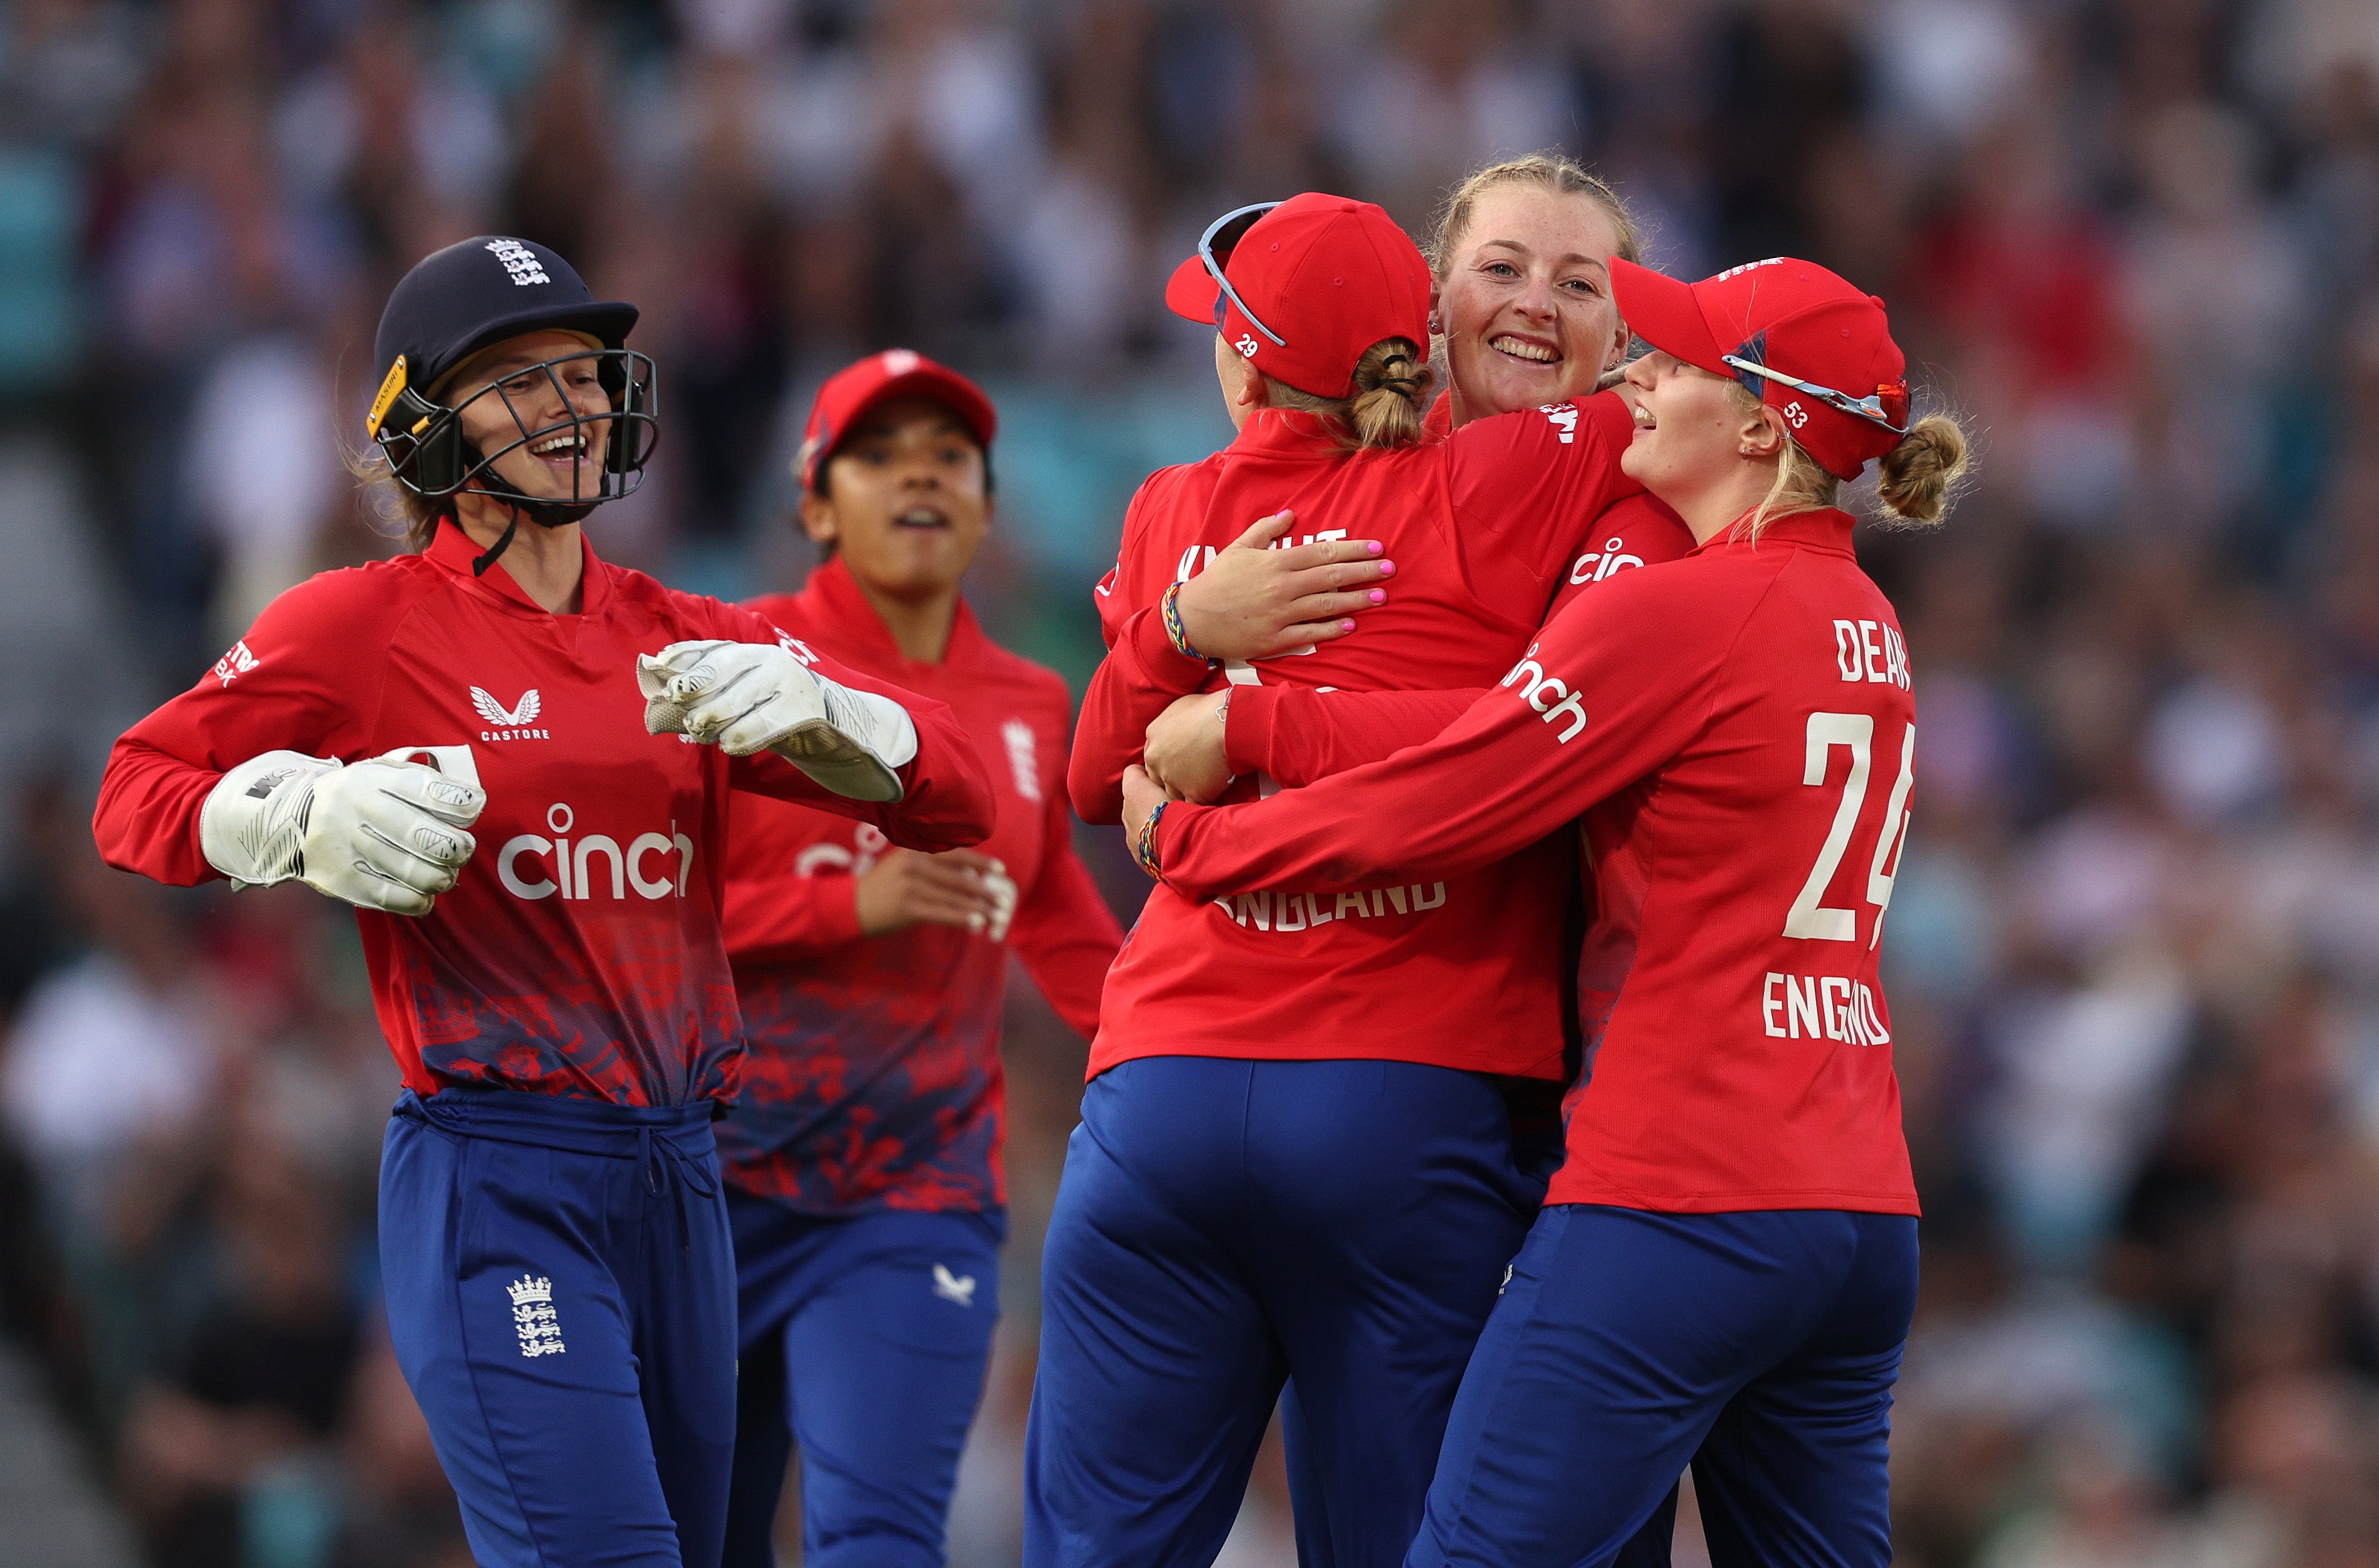 Women's Ashes still alive after England clinch last gasp win over Australia  | The Independent